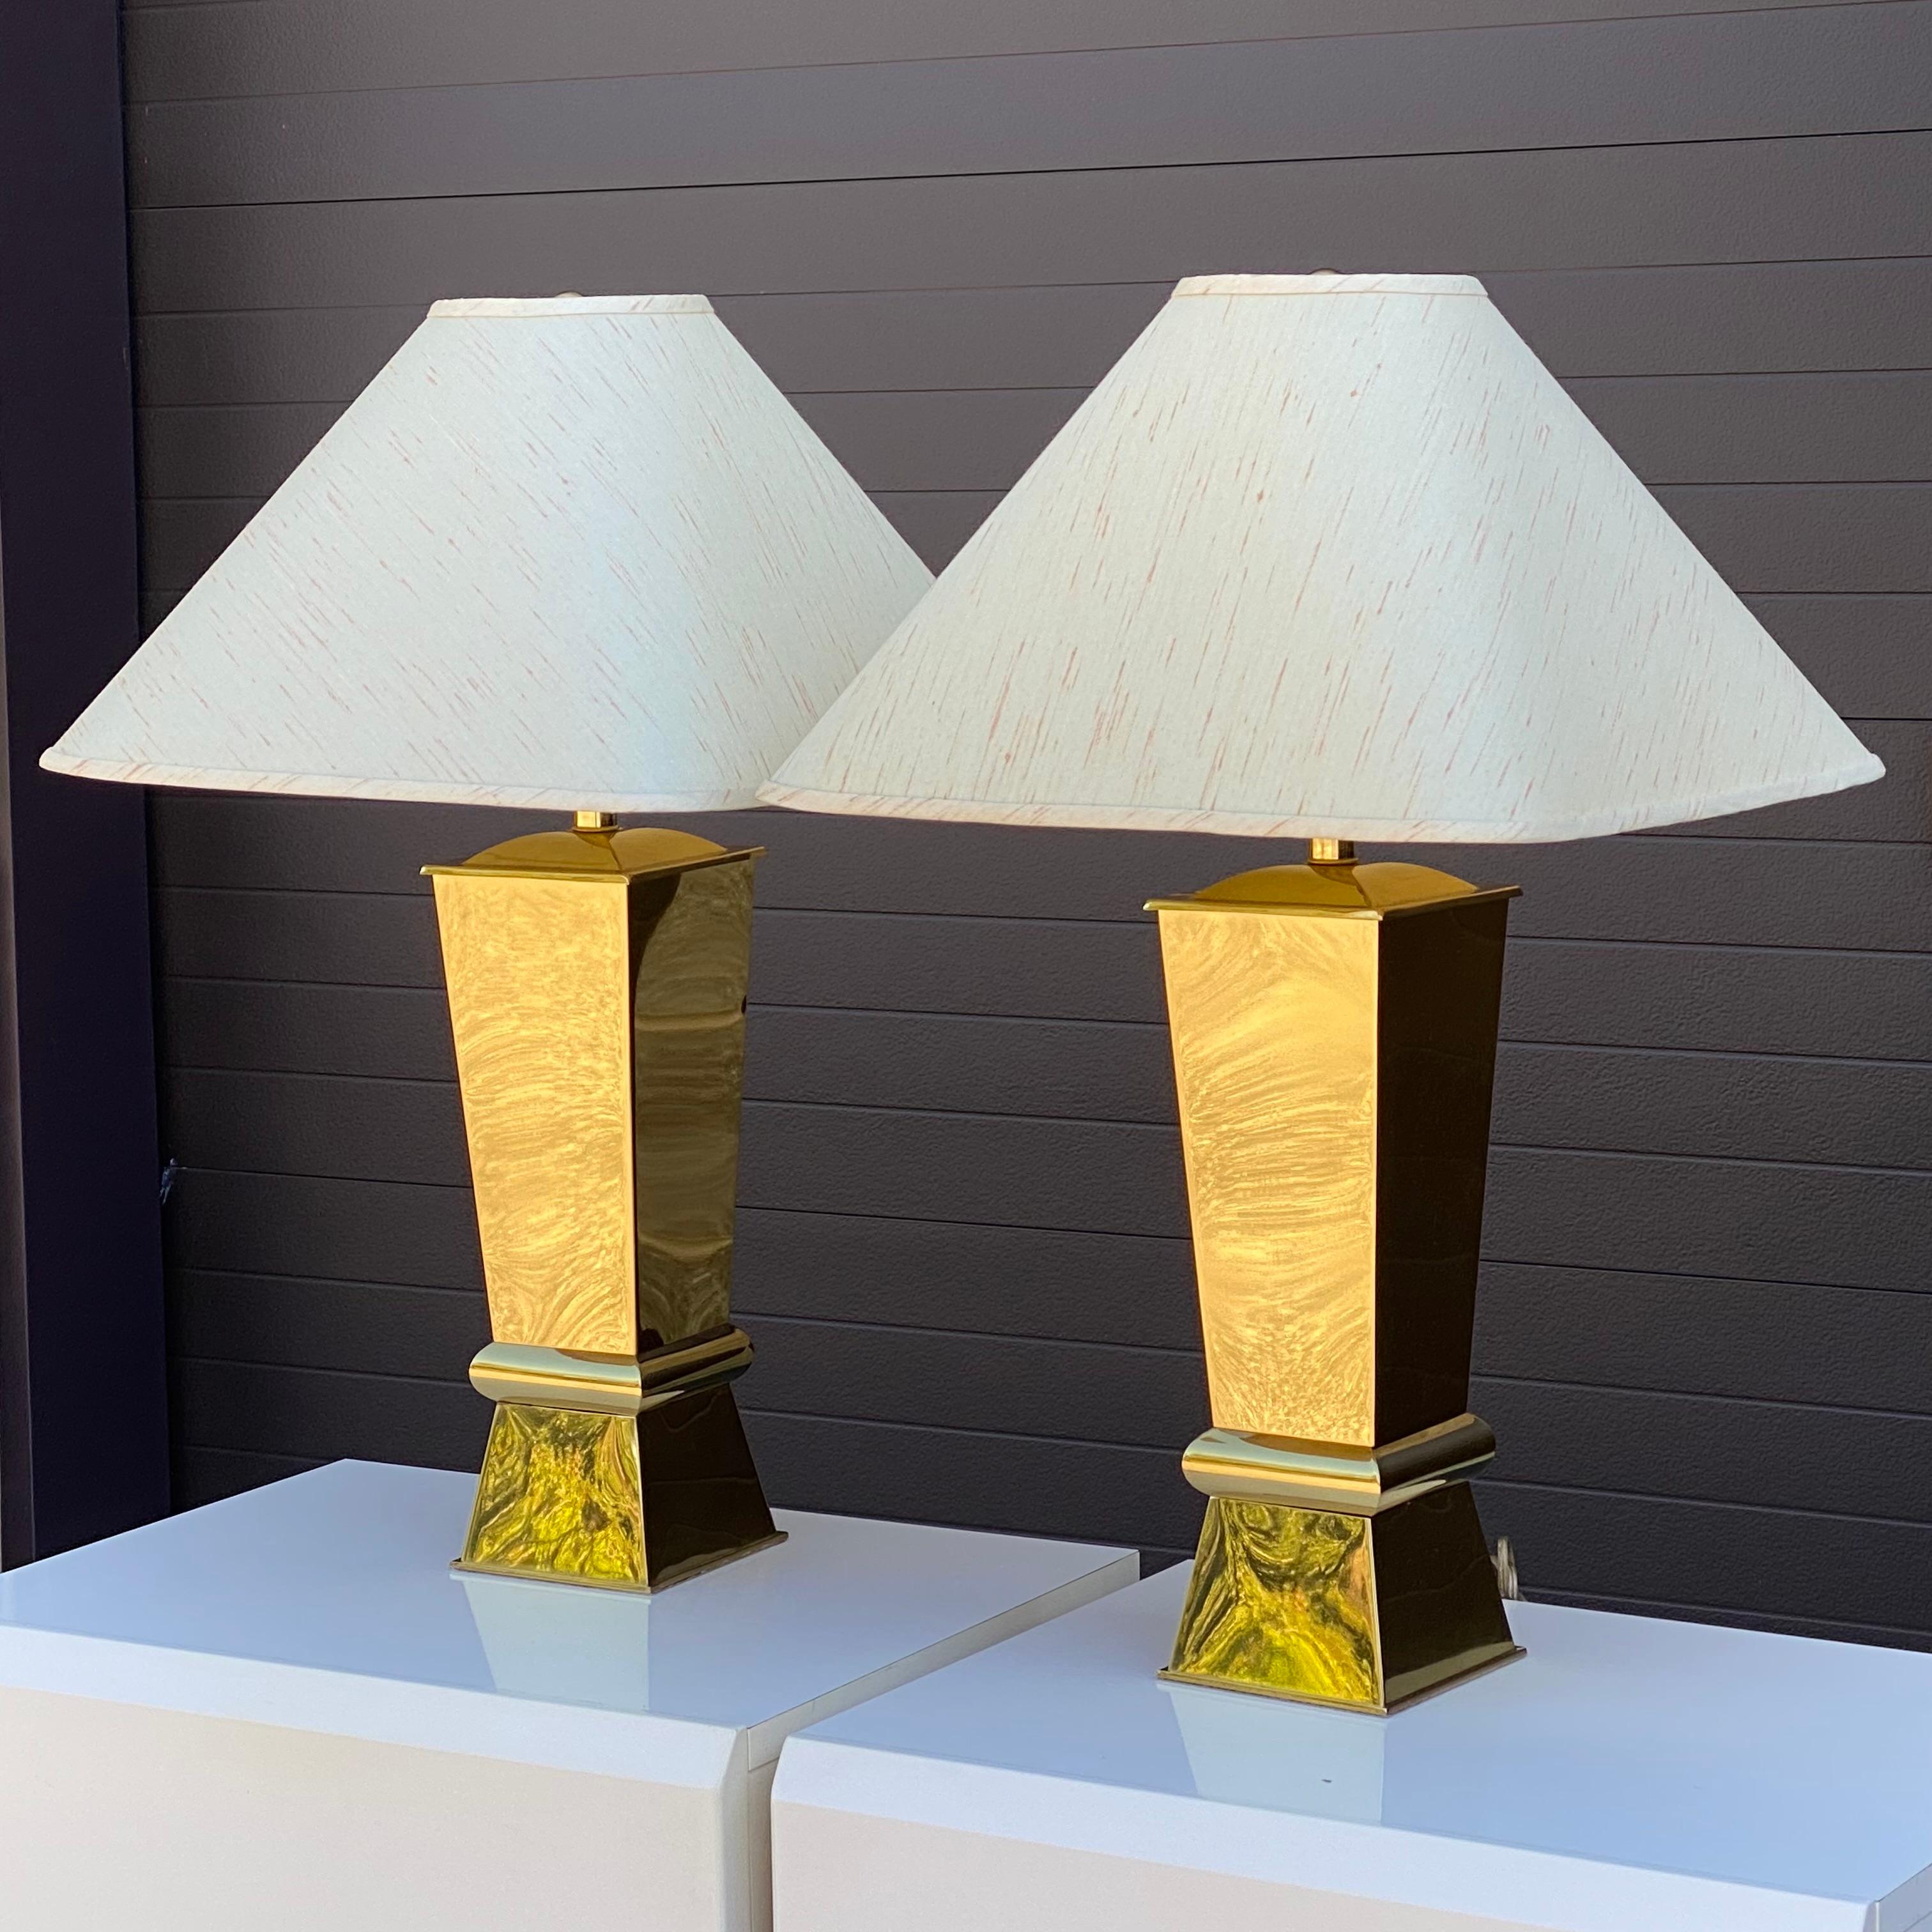 Pair of 1980's sculptural brass lamps with original white and pink shades and brass ball finials.

Shade measurements:
18.75” x 18.75” x 11”h 
Lamp measurements:
6